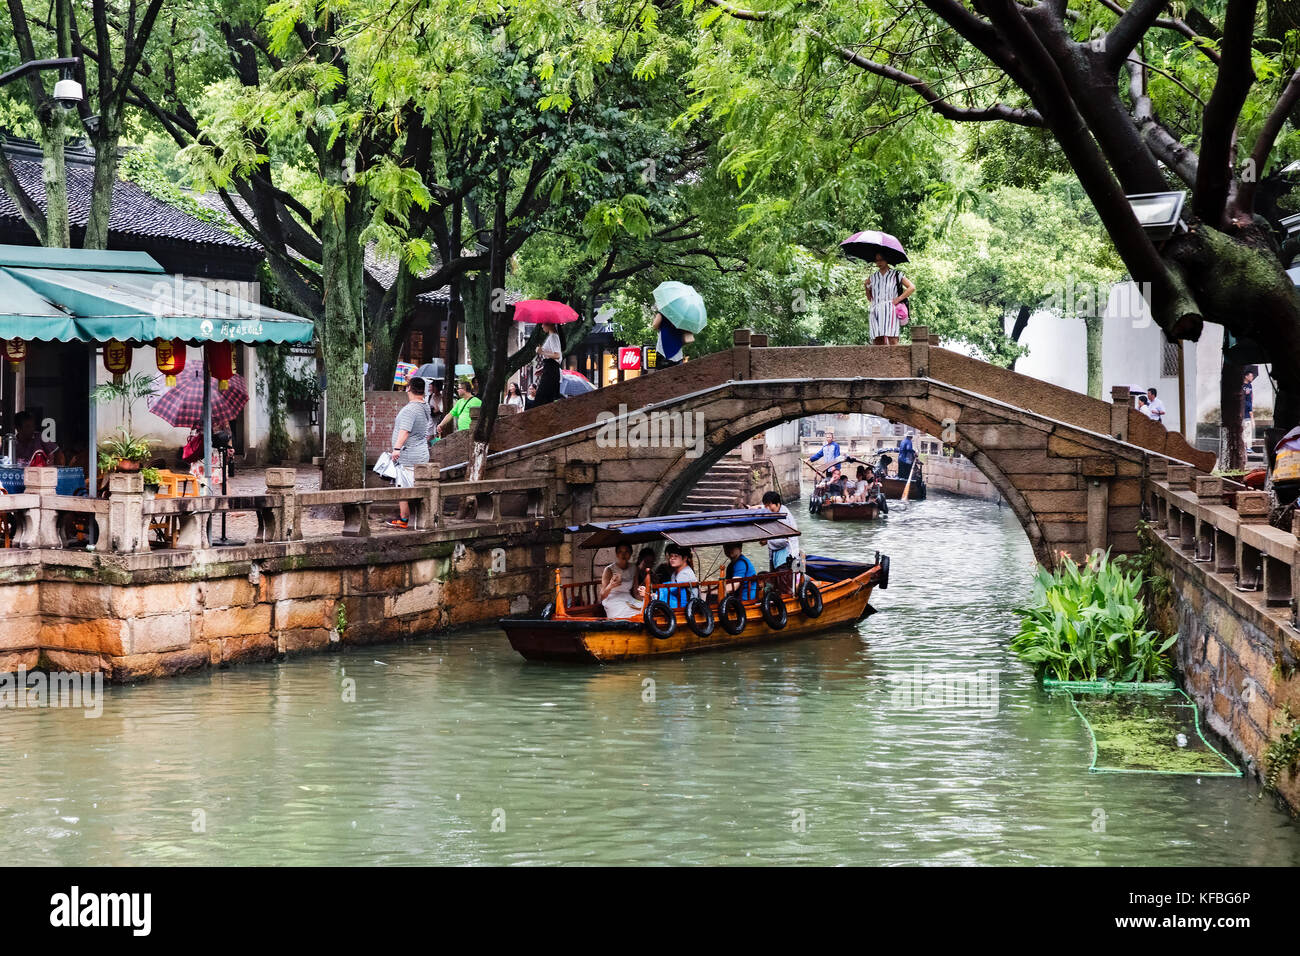 Stock Photo - Tourists ride in row boats in a canal in an ancient town in China, a woman is rowing one of the boat a man is rowing the other Stock Photo